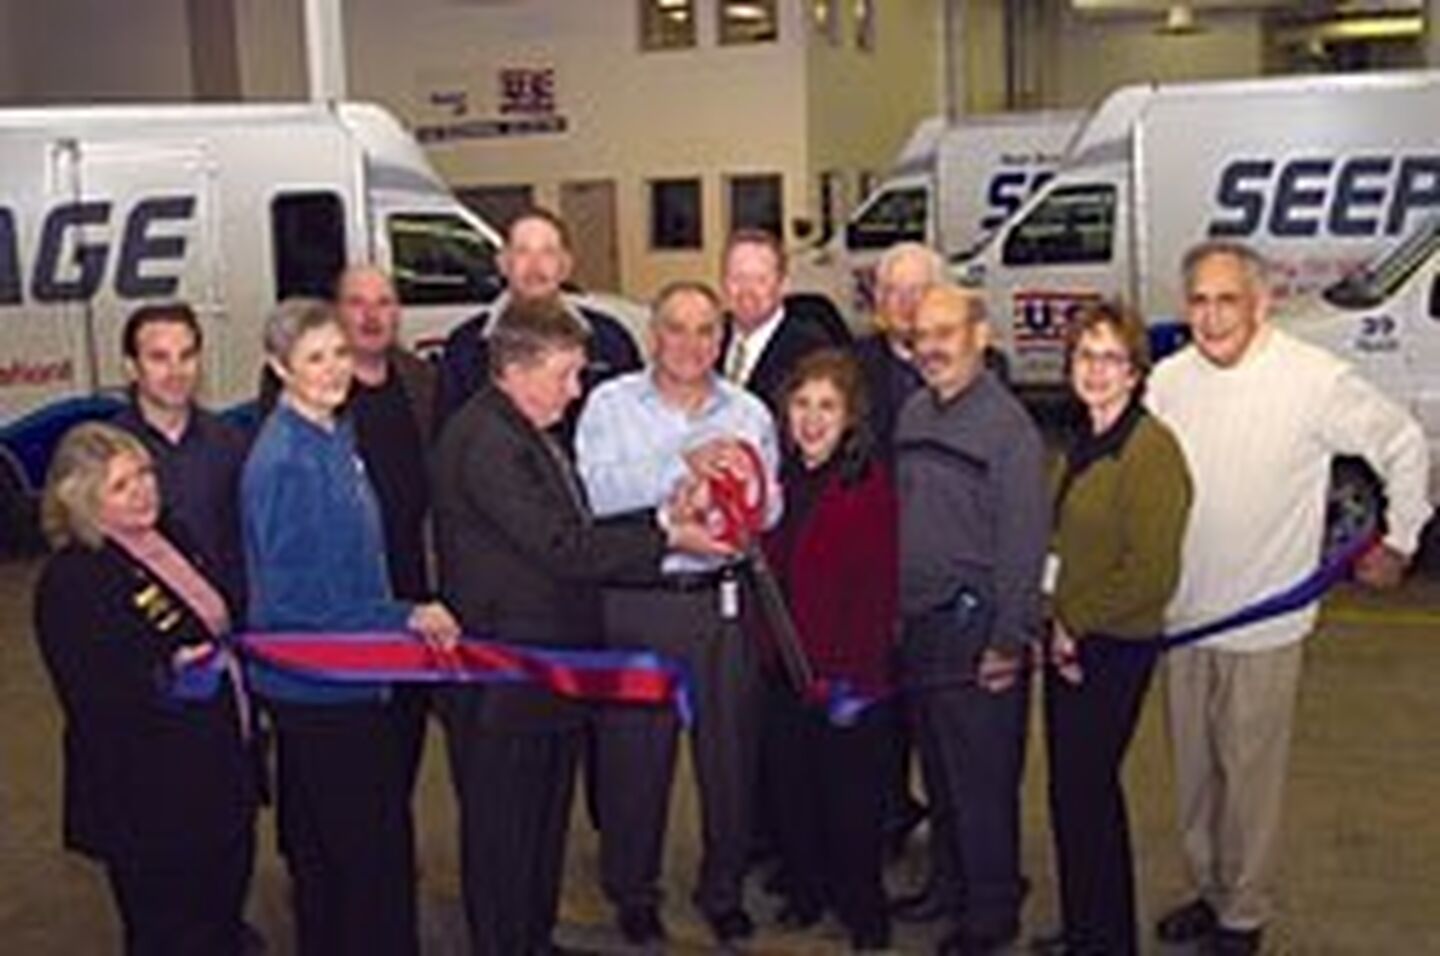 U.S. Waterproofing's Rolling Meadows ribbon cutting ceremony